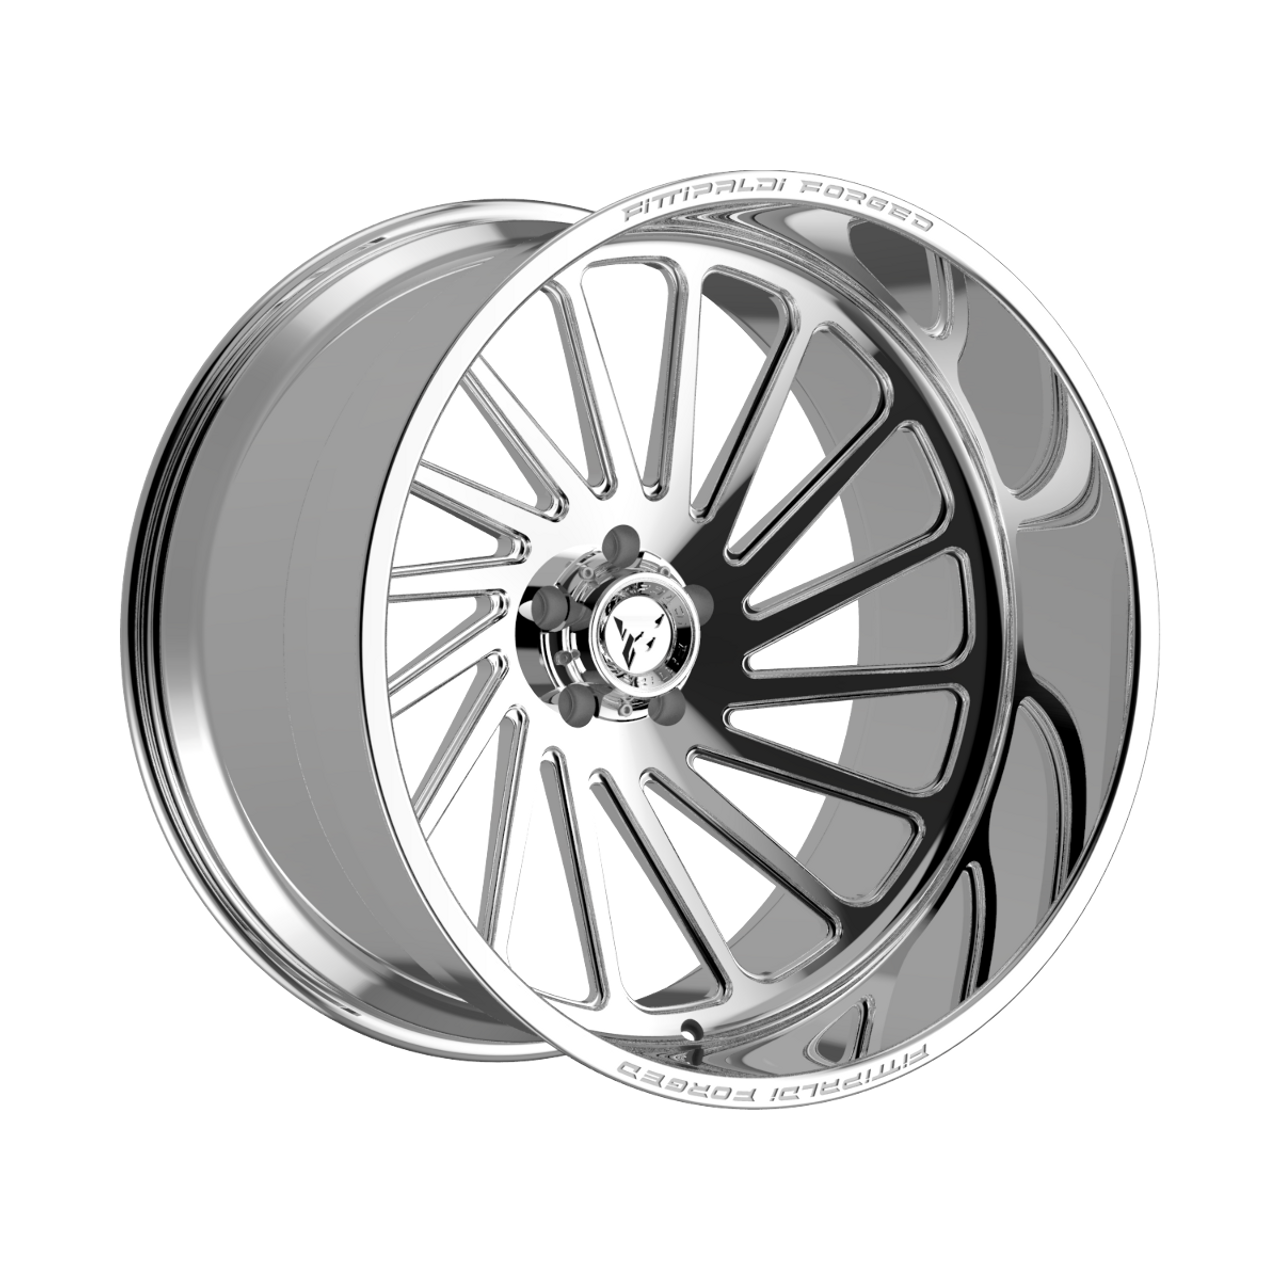 24" Fittipaldi Wheel FTF503P 24x14 Polished 8x180 -76mm Lifted For Chevy GMC Rim